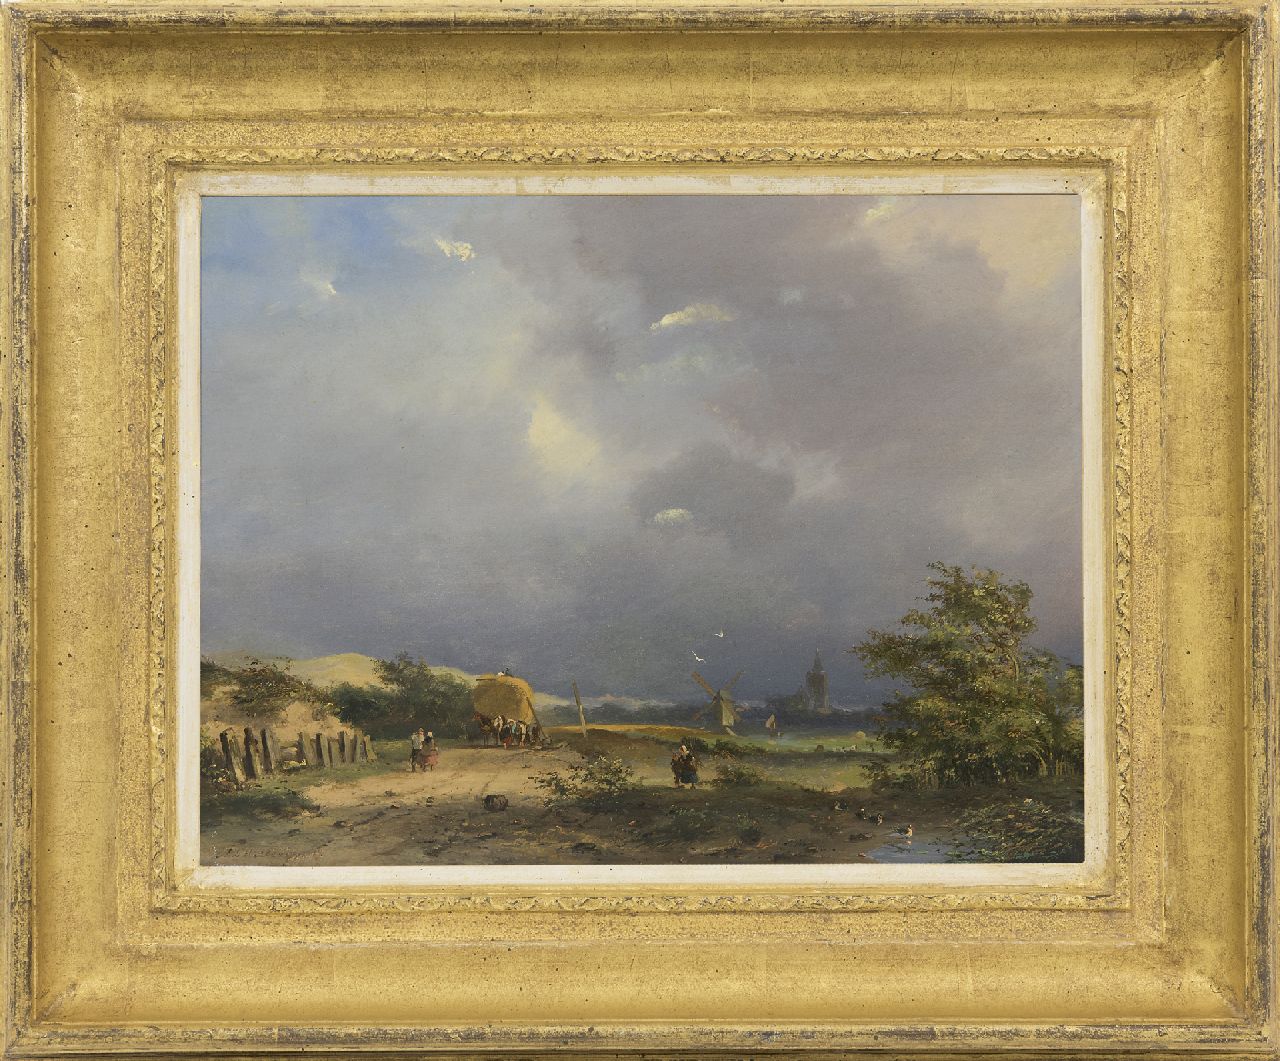 Hilleveld A.D.  | Adrianus David Hilleveld | Paintings offered for sale | A landscape with farmers and a harvester, oil on panel 24.6 x 32.0 cm, signed l.l.